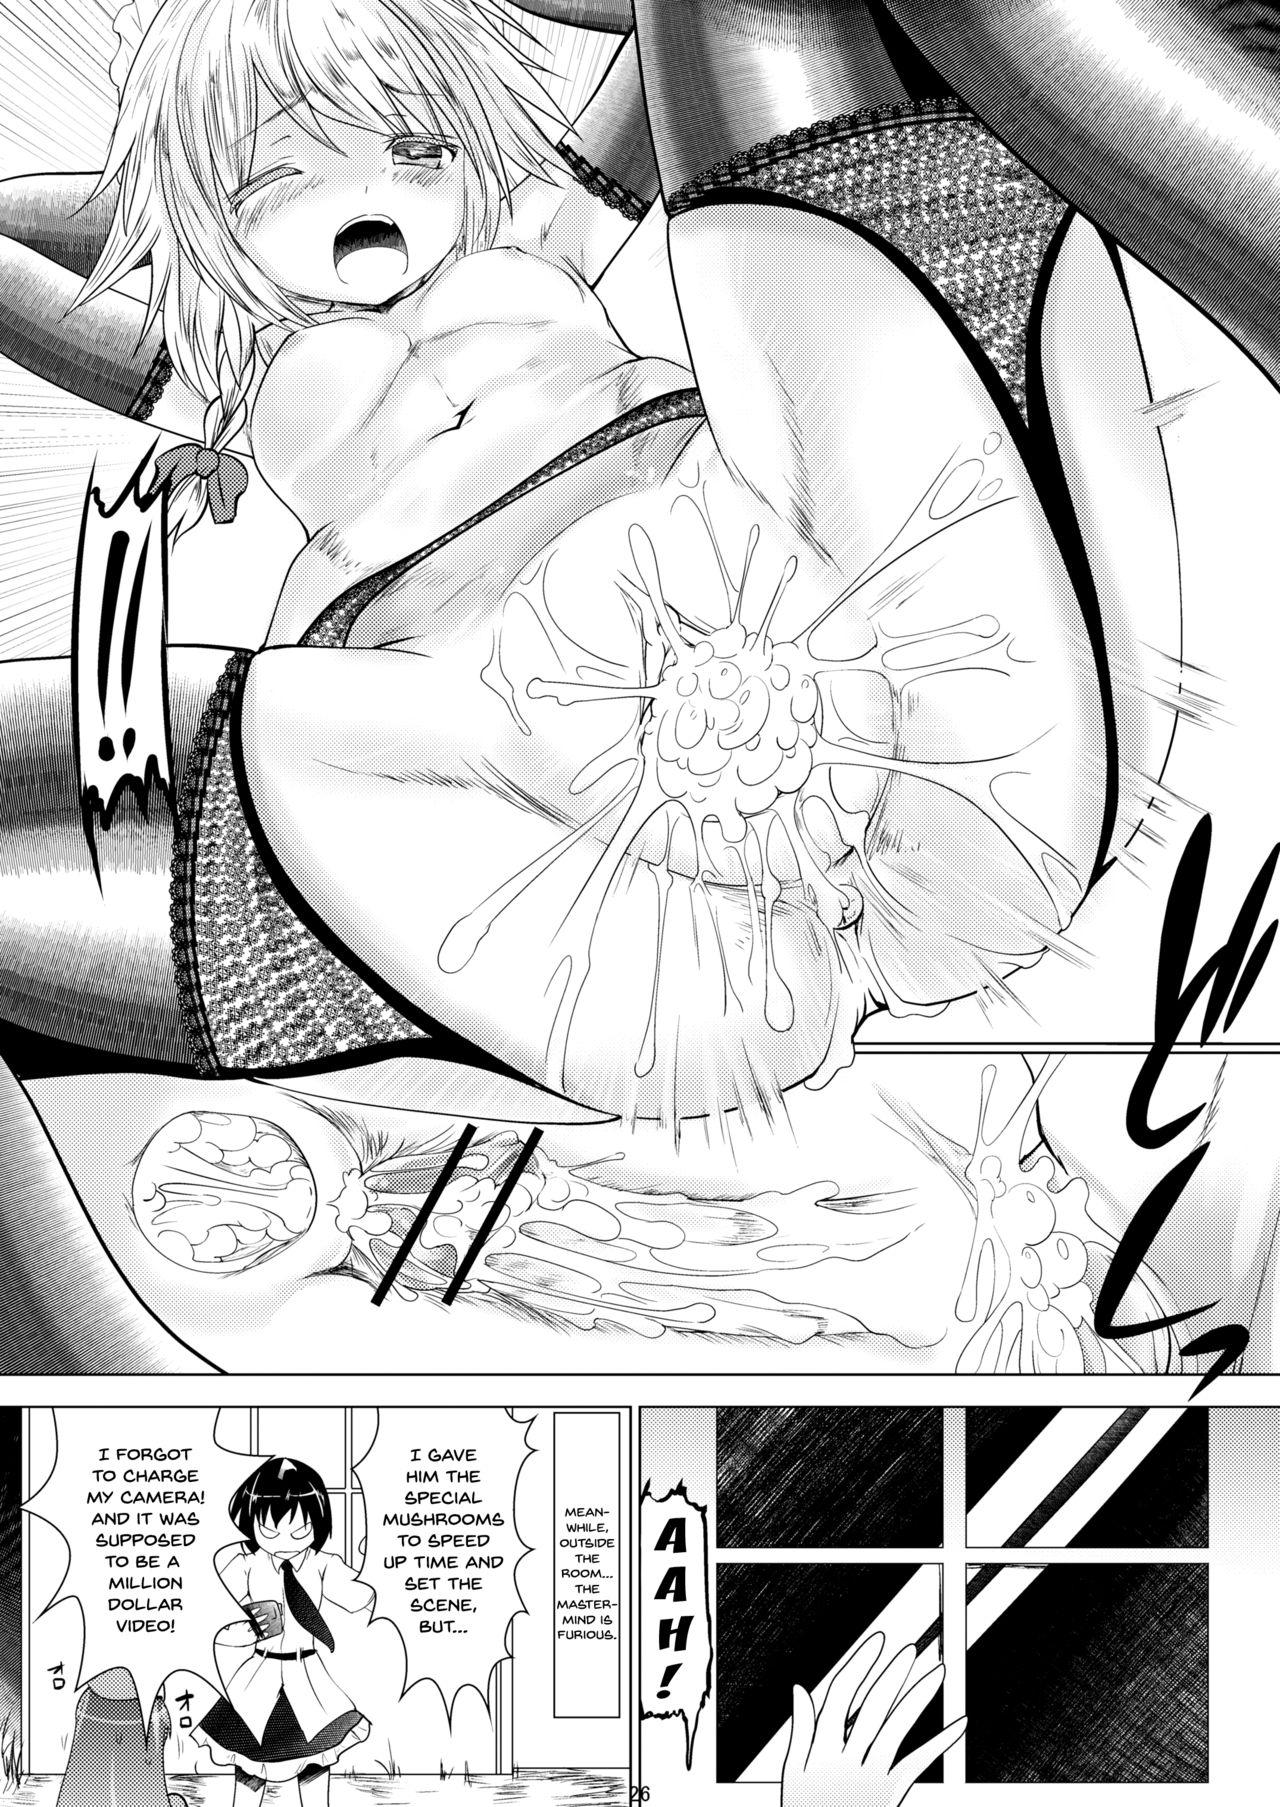 Sucking Chi to Maid to Garter Belt - Touhou project Art - Page 24